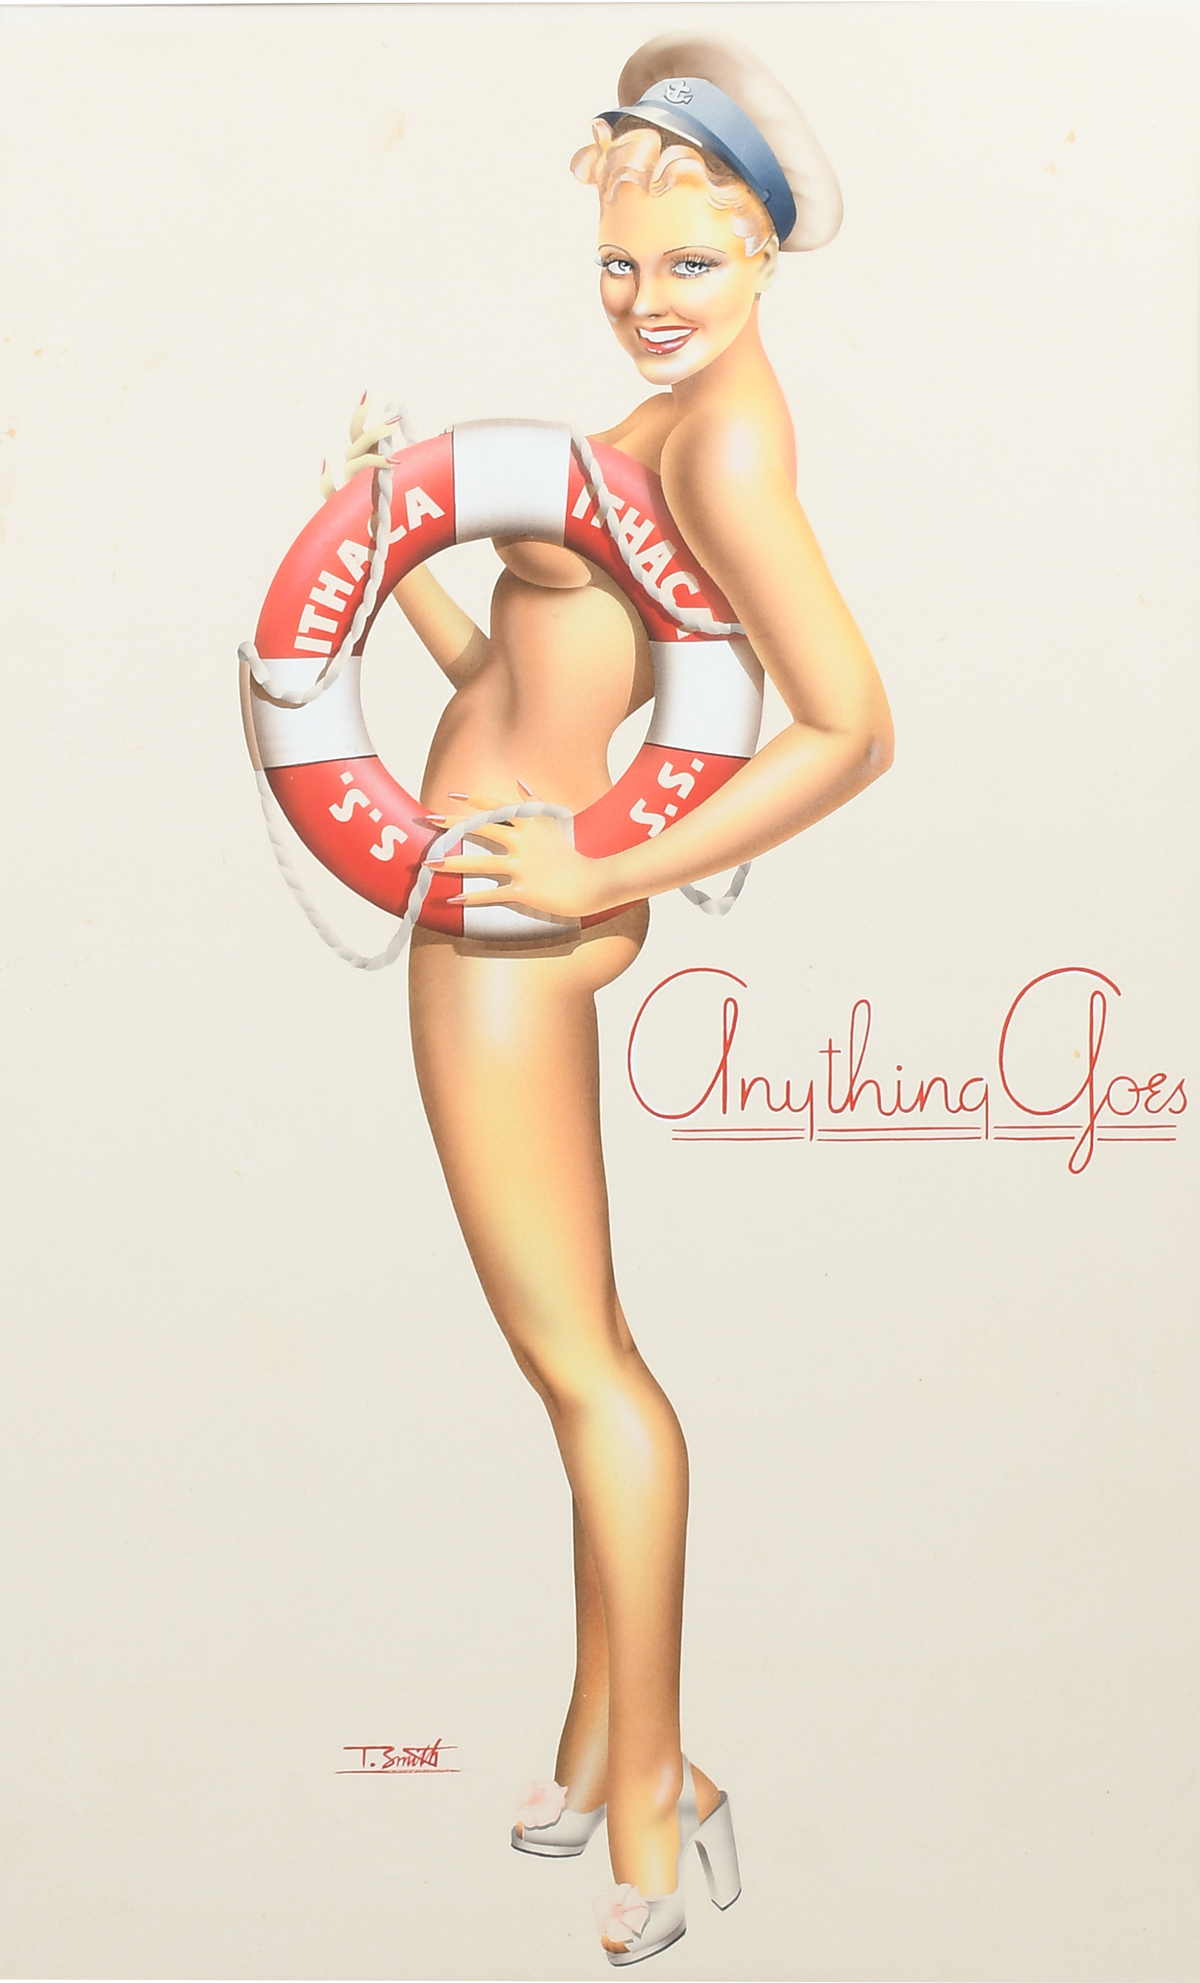  ANYTHING GOES DECO PINUP ILLUSTRATION 36b3f5